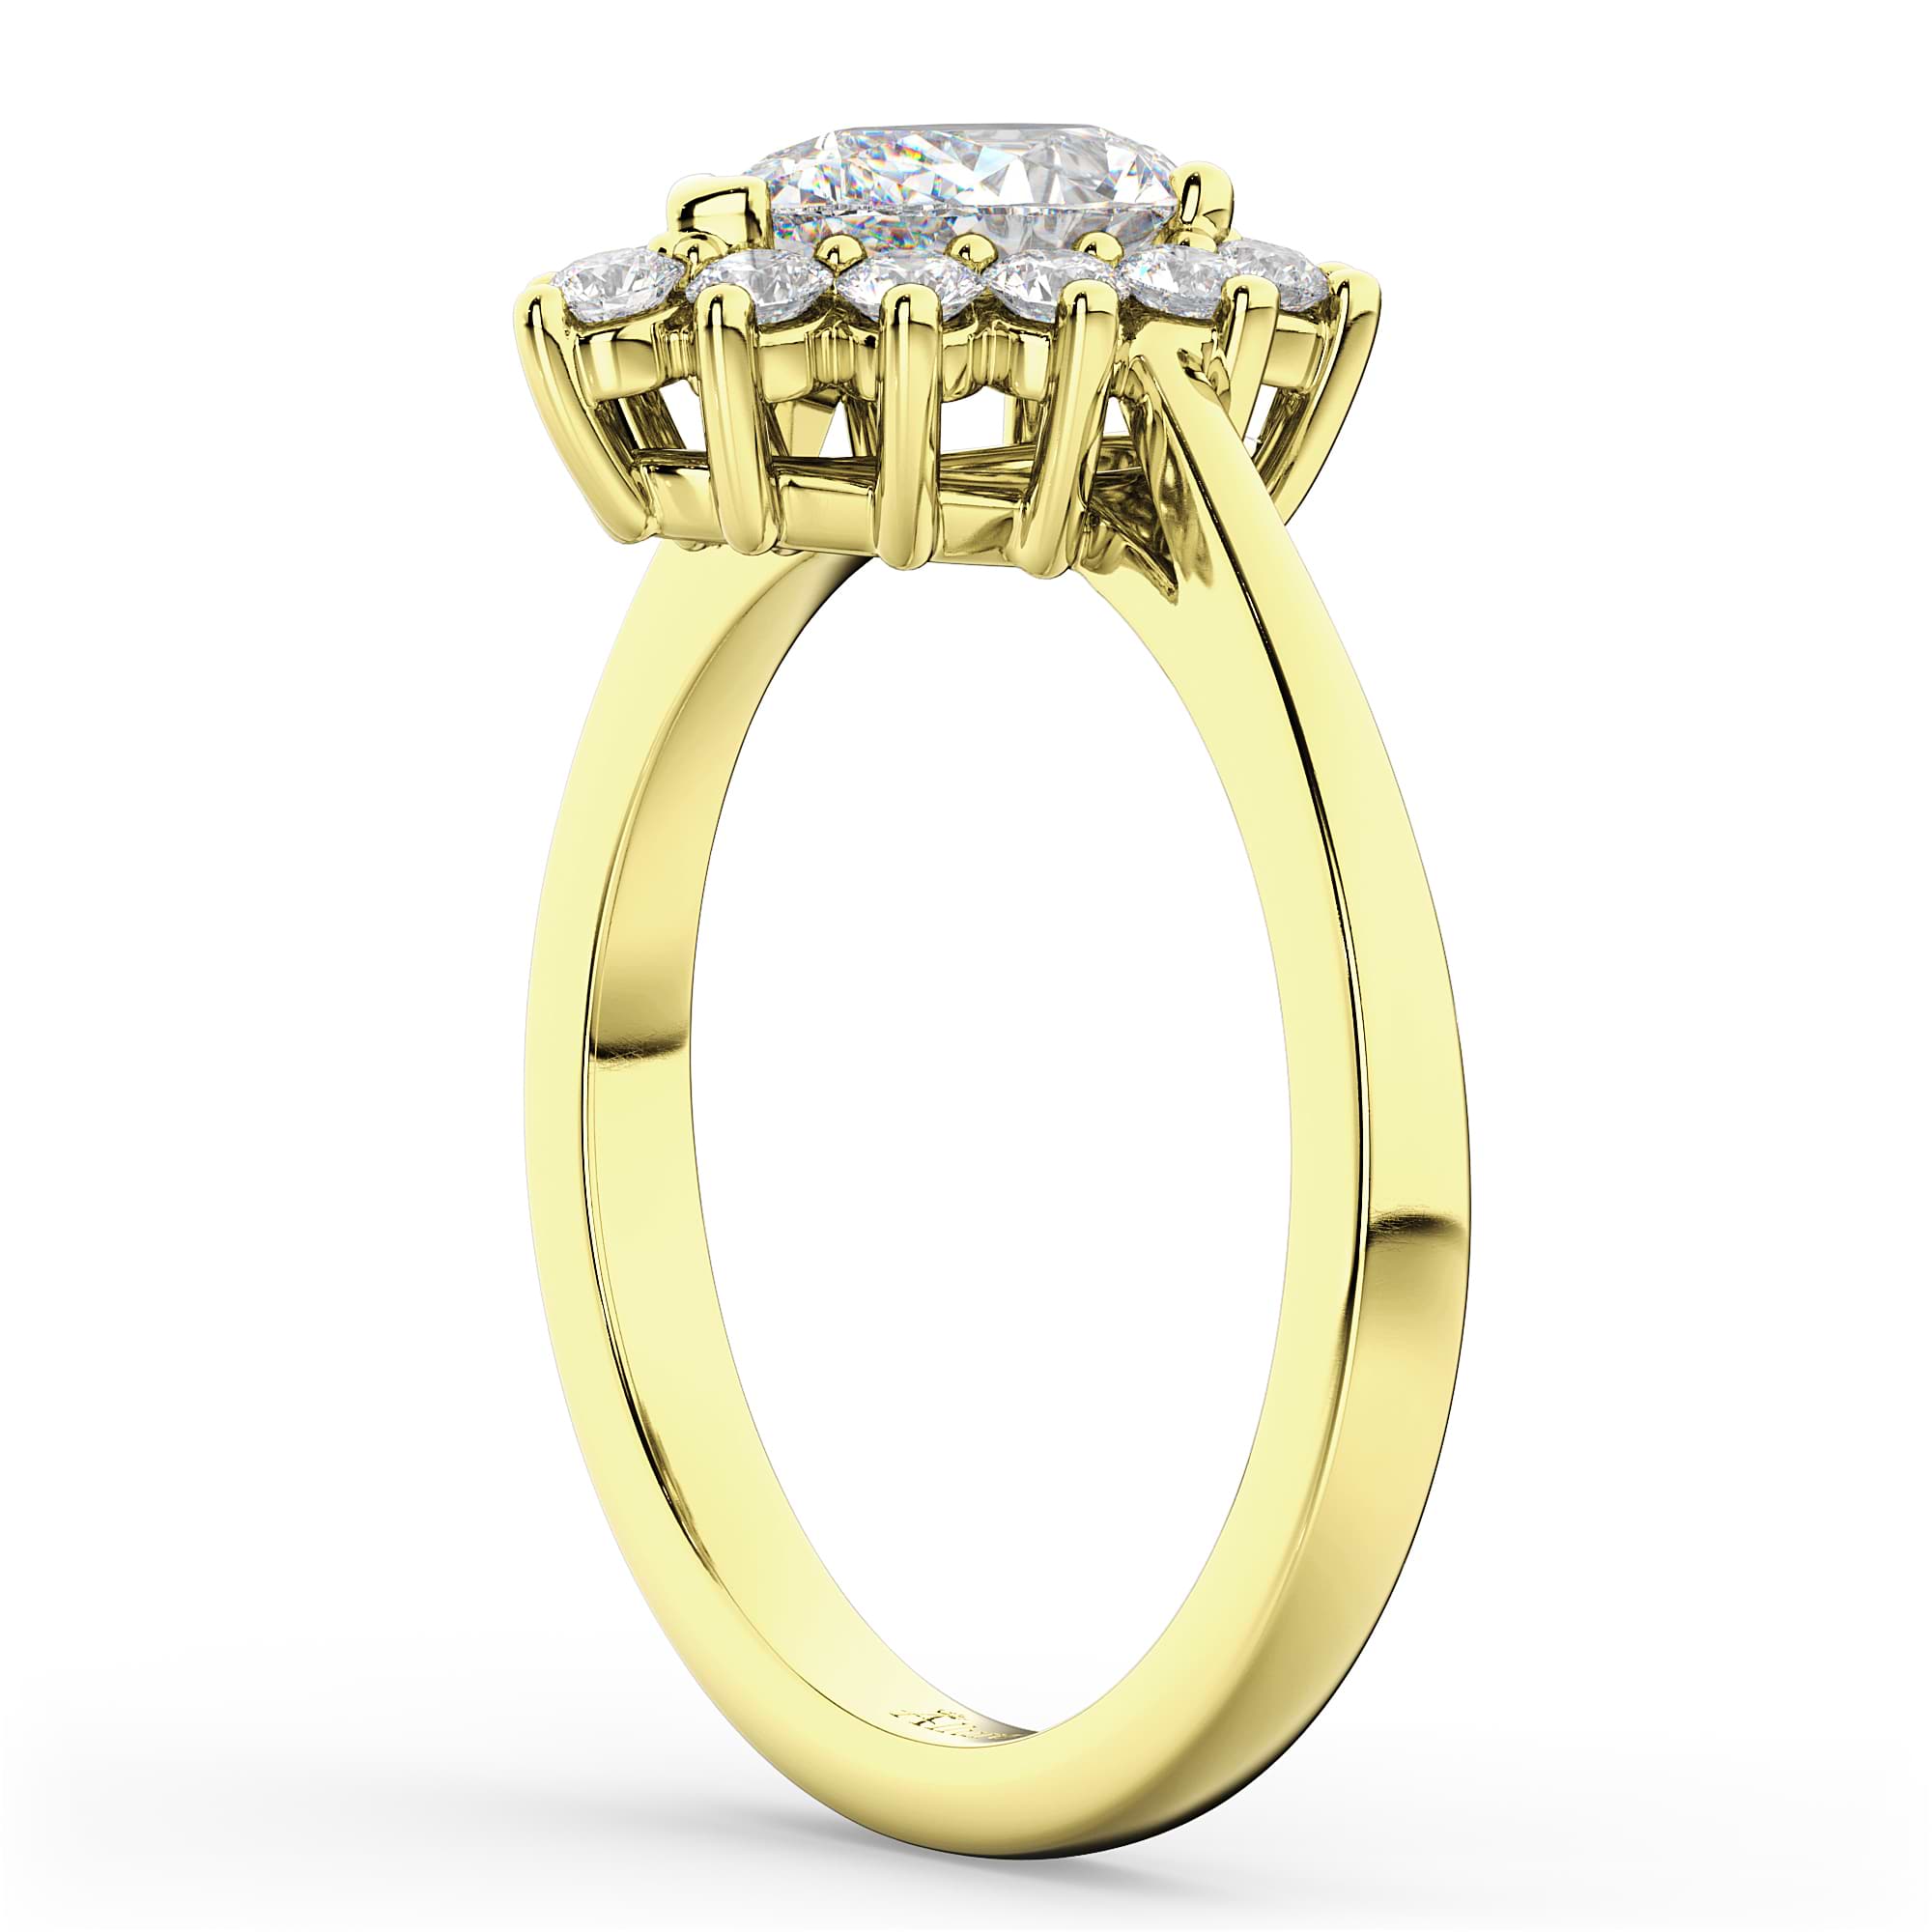 Halo Pear Shaped Diamond Engagement Ring 14k Yellow Gold (1.12ct)